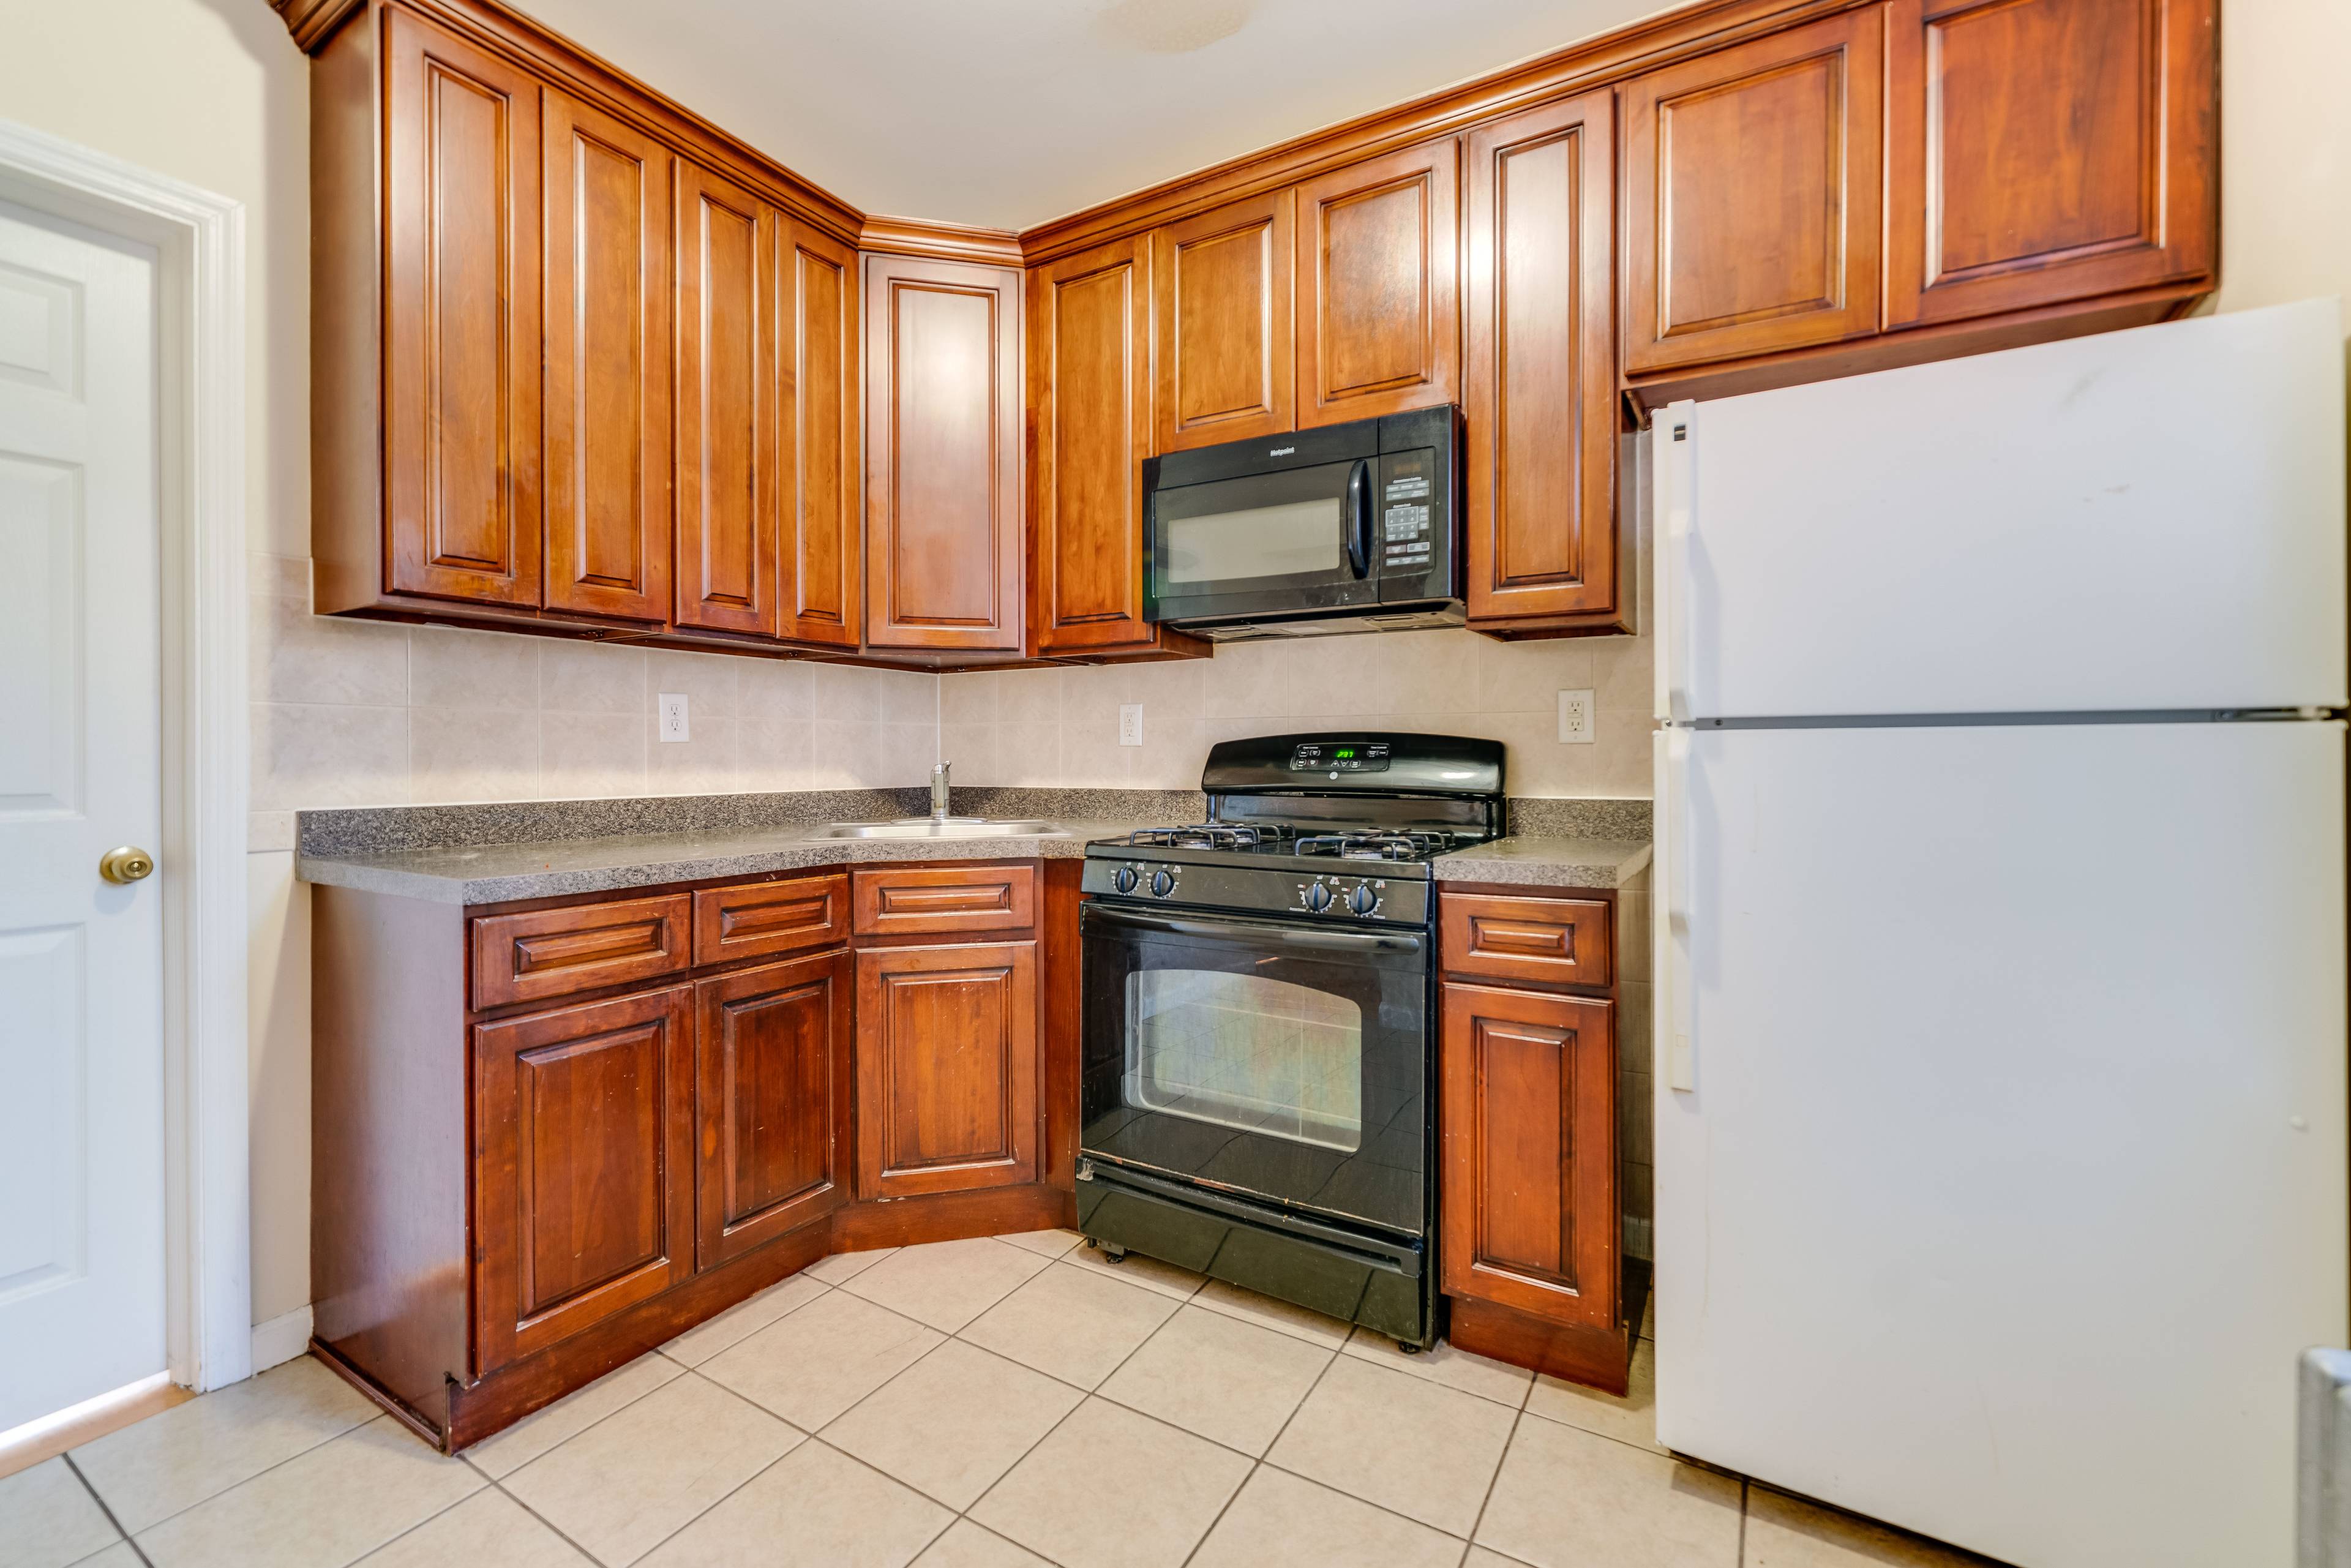 2BR Apartment located at 152 New York Avenue in Jersey City Heights!  Queen Size Bedrooms! Laundry On Site!